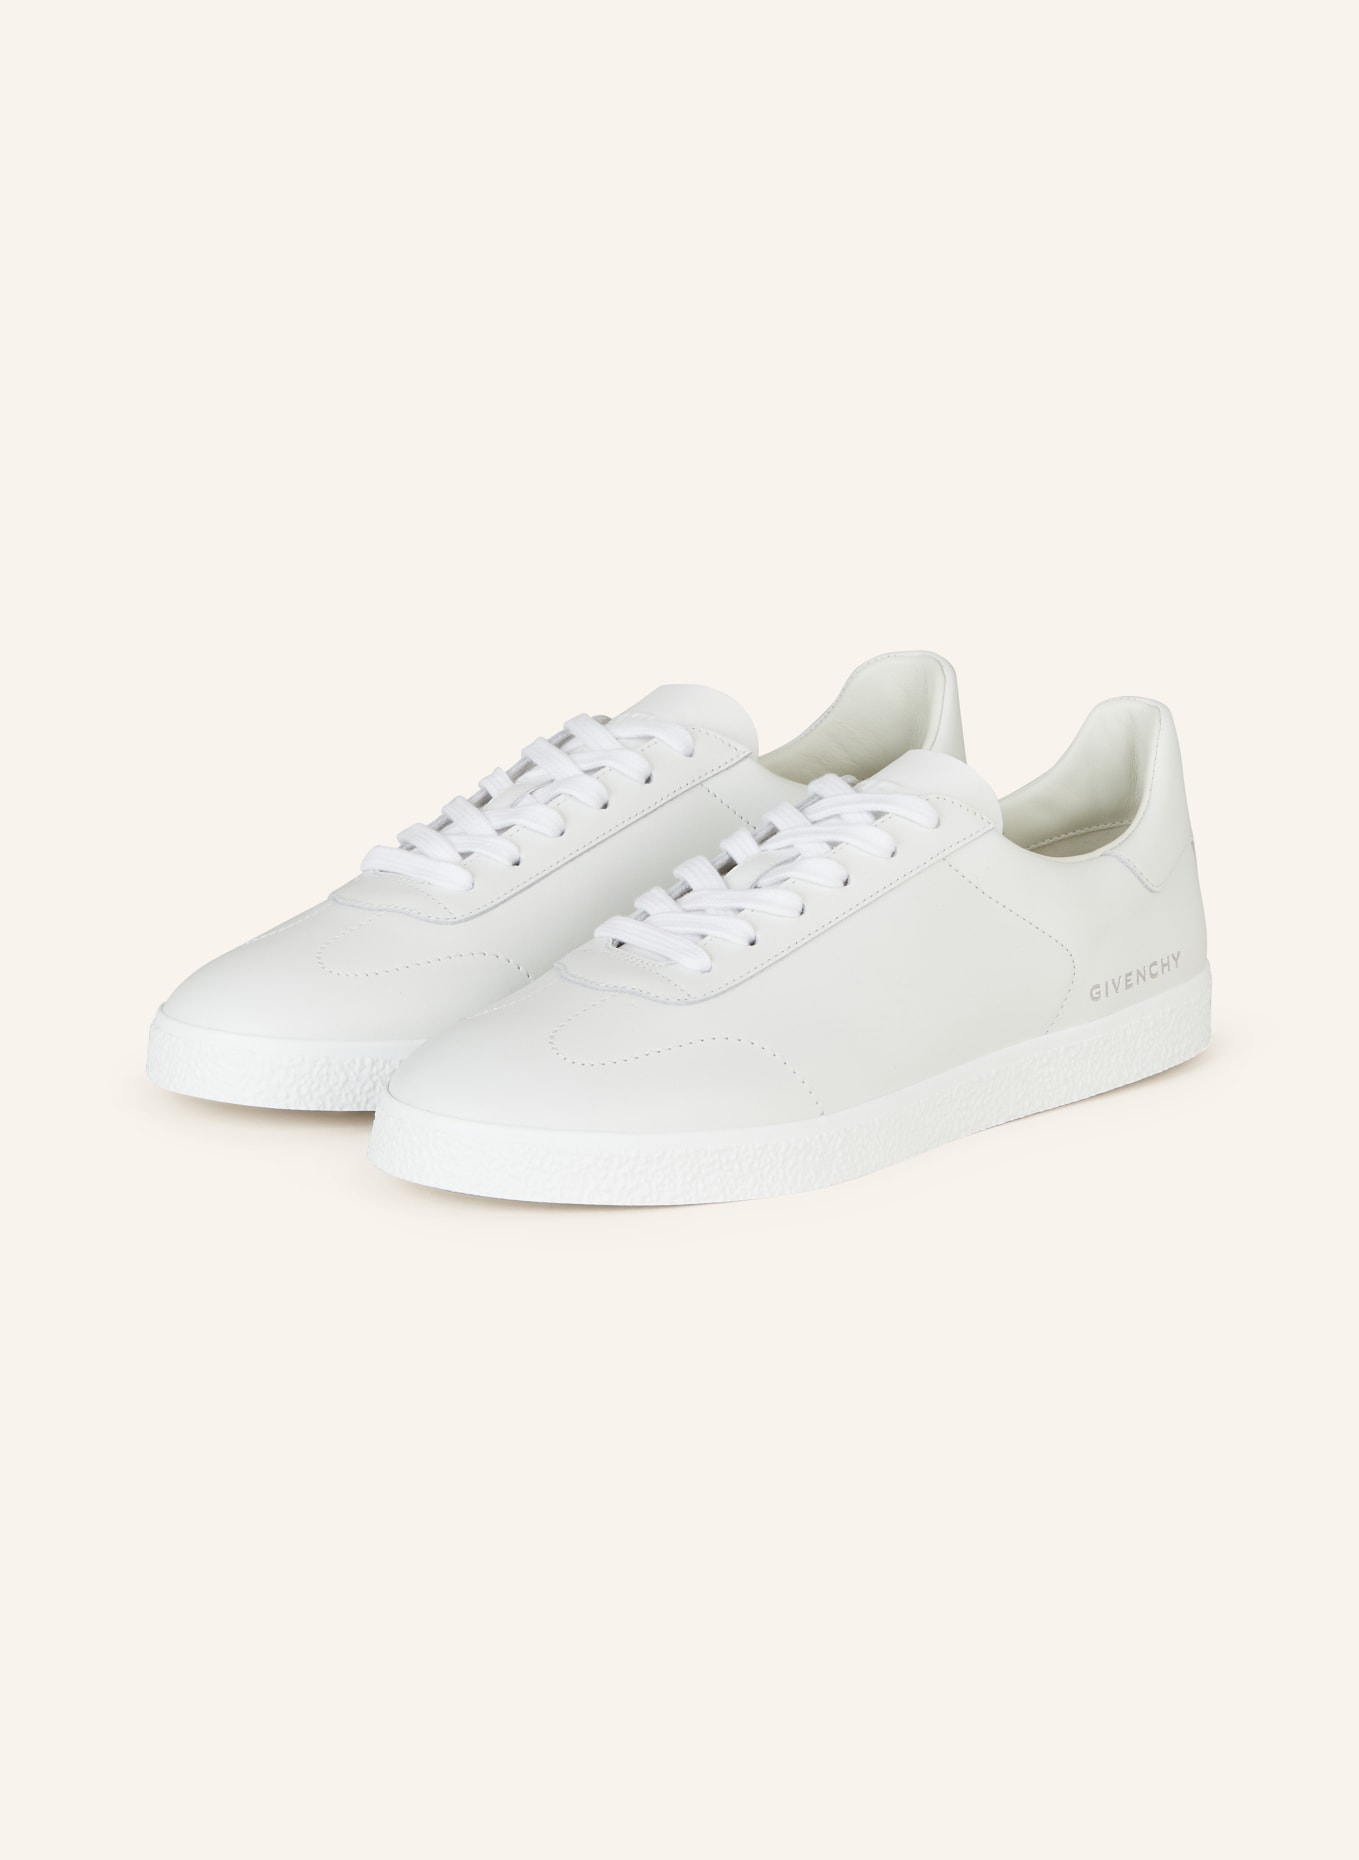 GIVENCHY Sneaker TOWN, Farbe: WEISS (Bild 1)